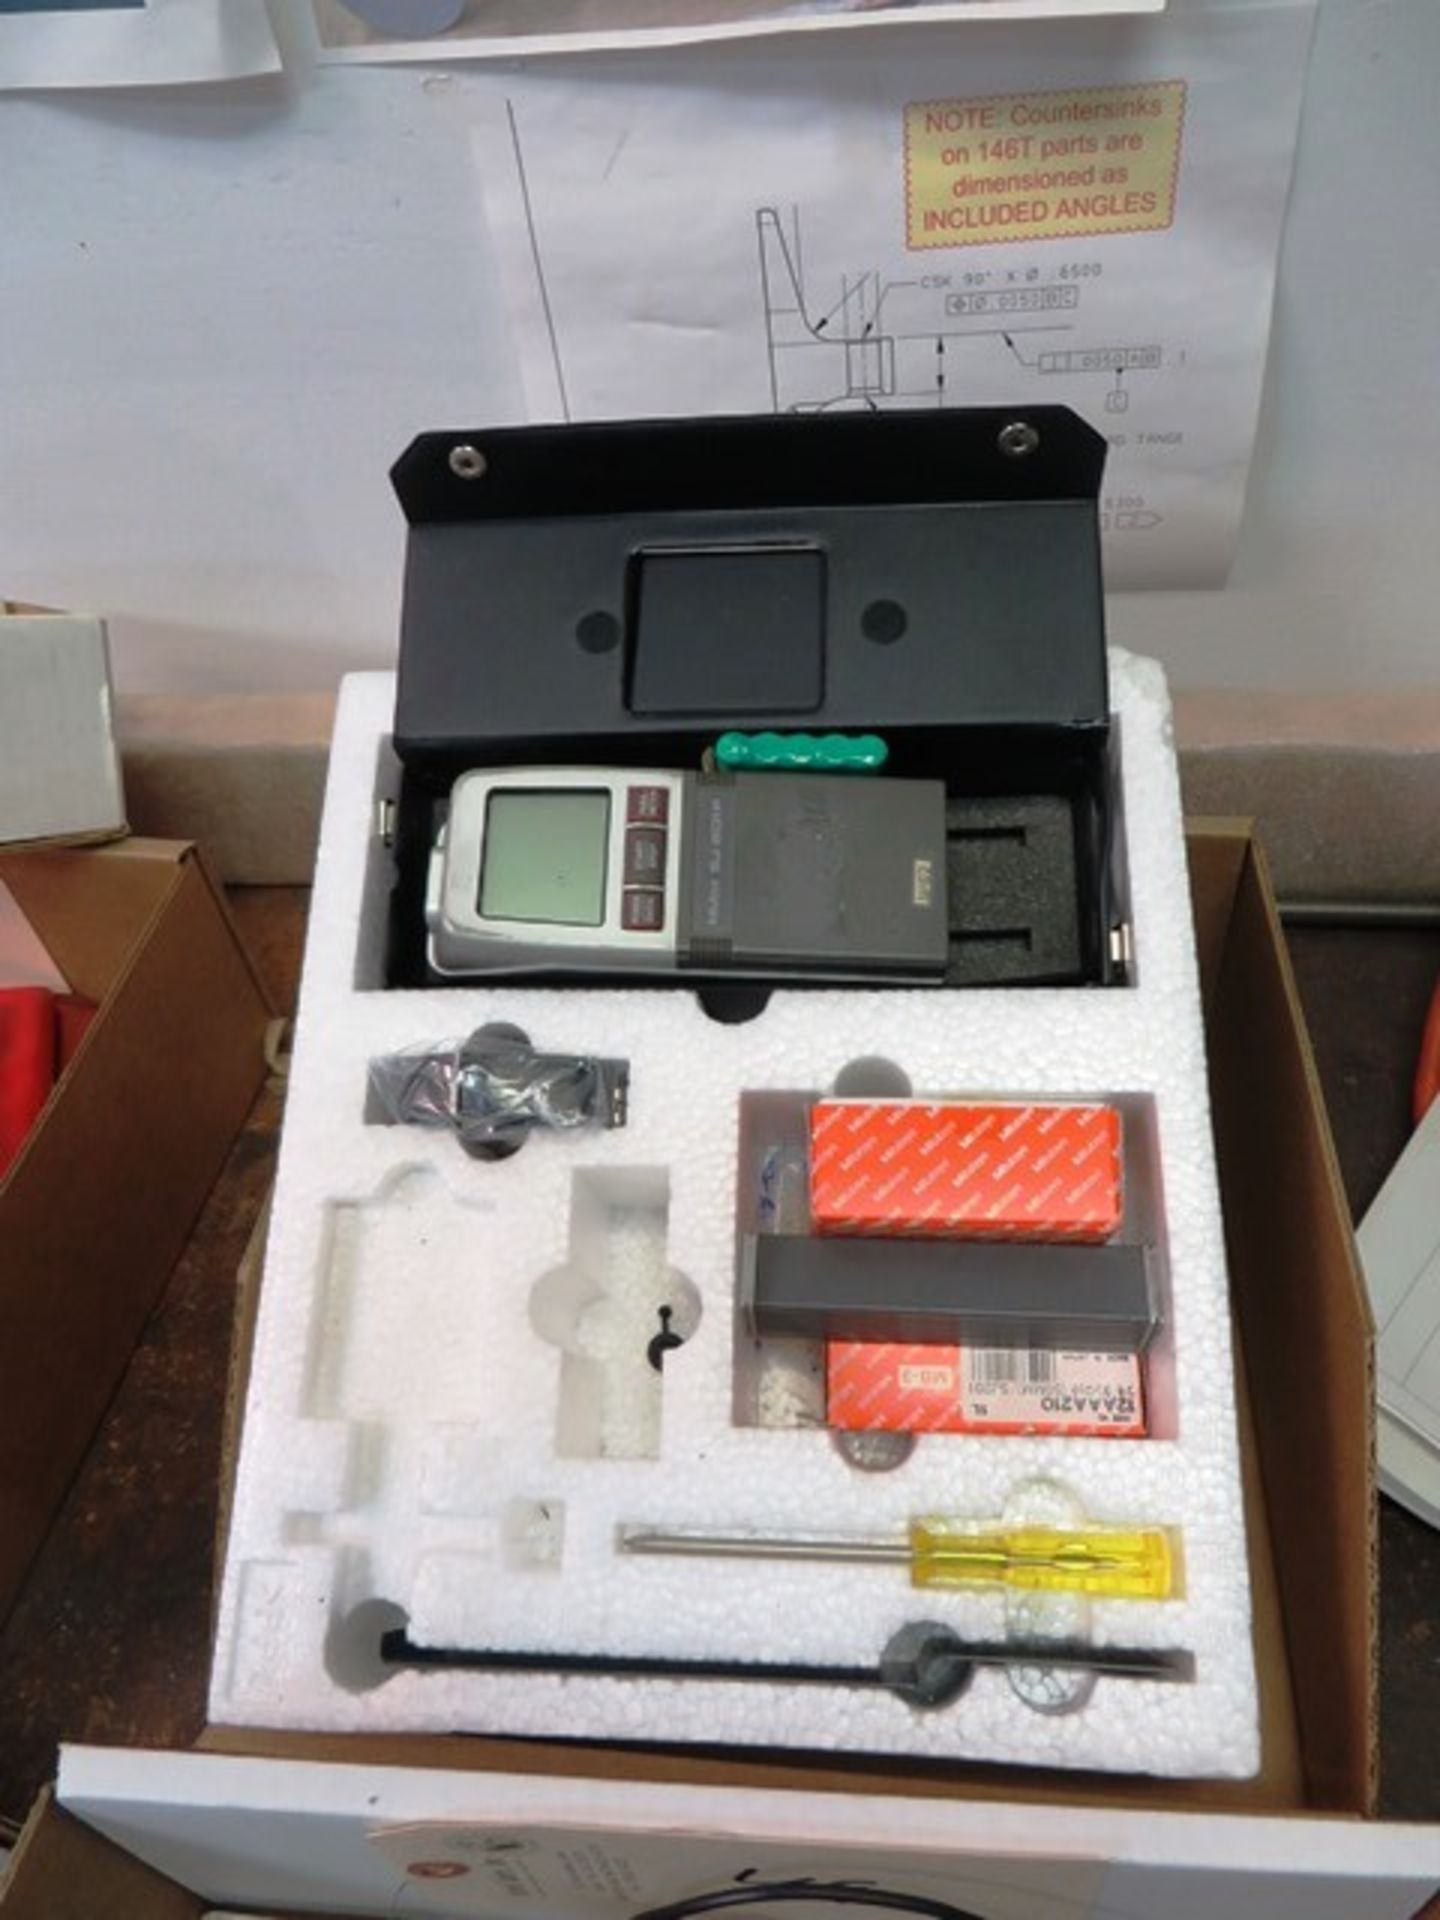 Mitutoyo Model SJ-201P Surface Roughness Tester